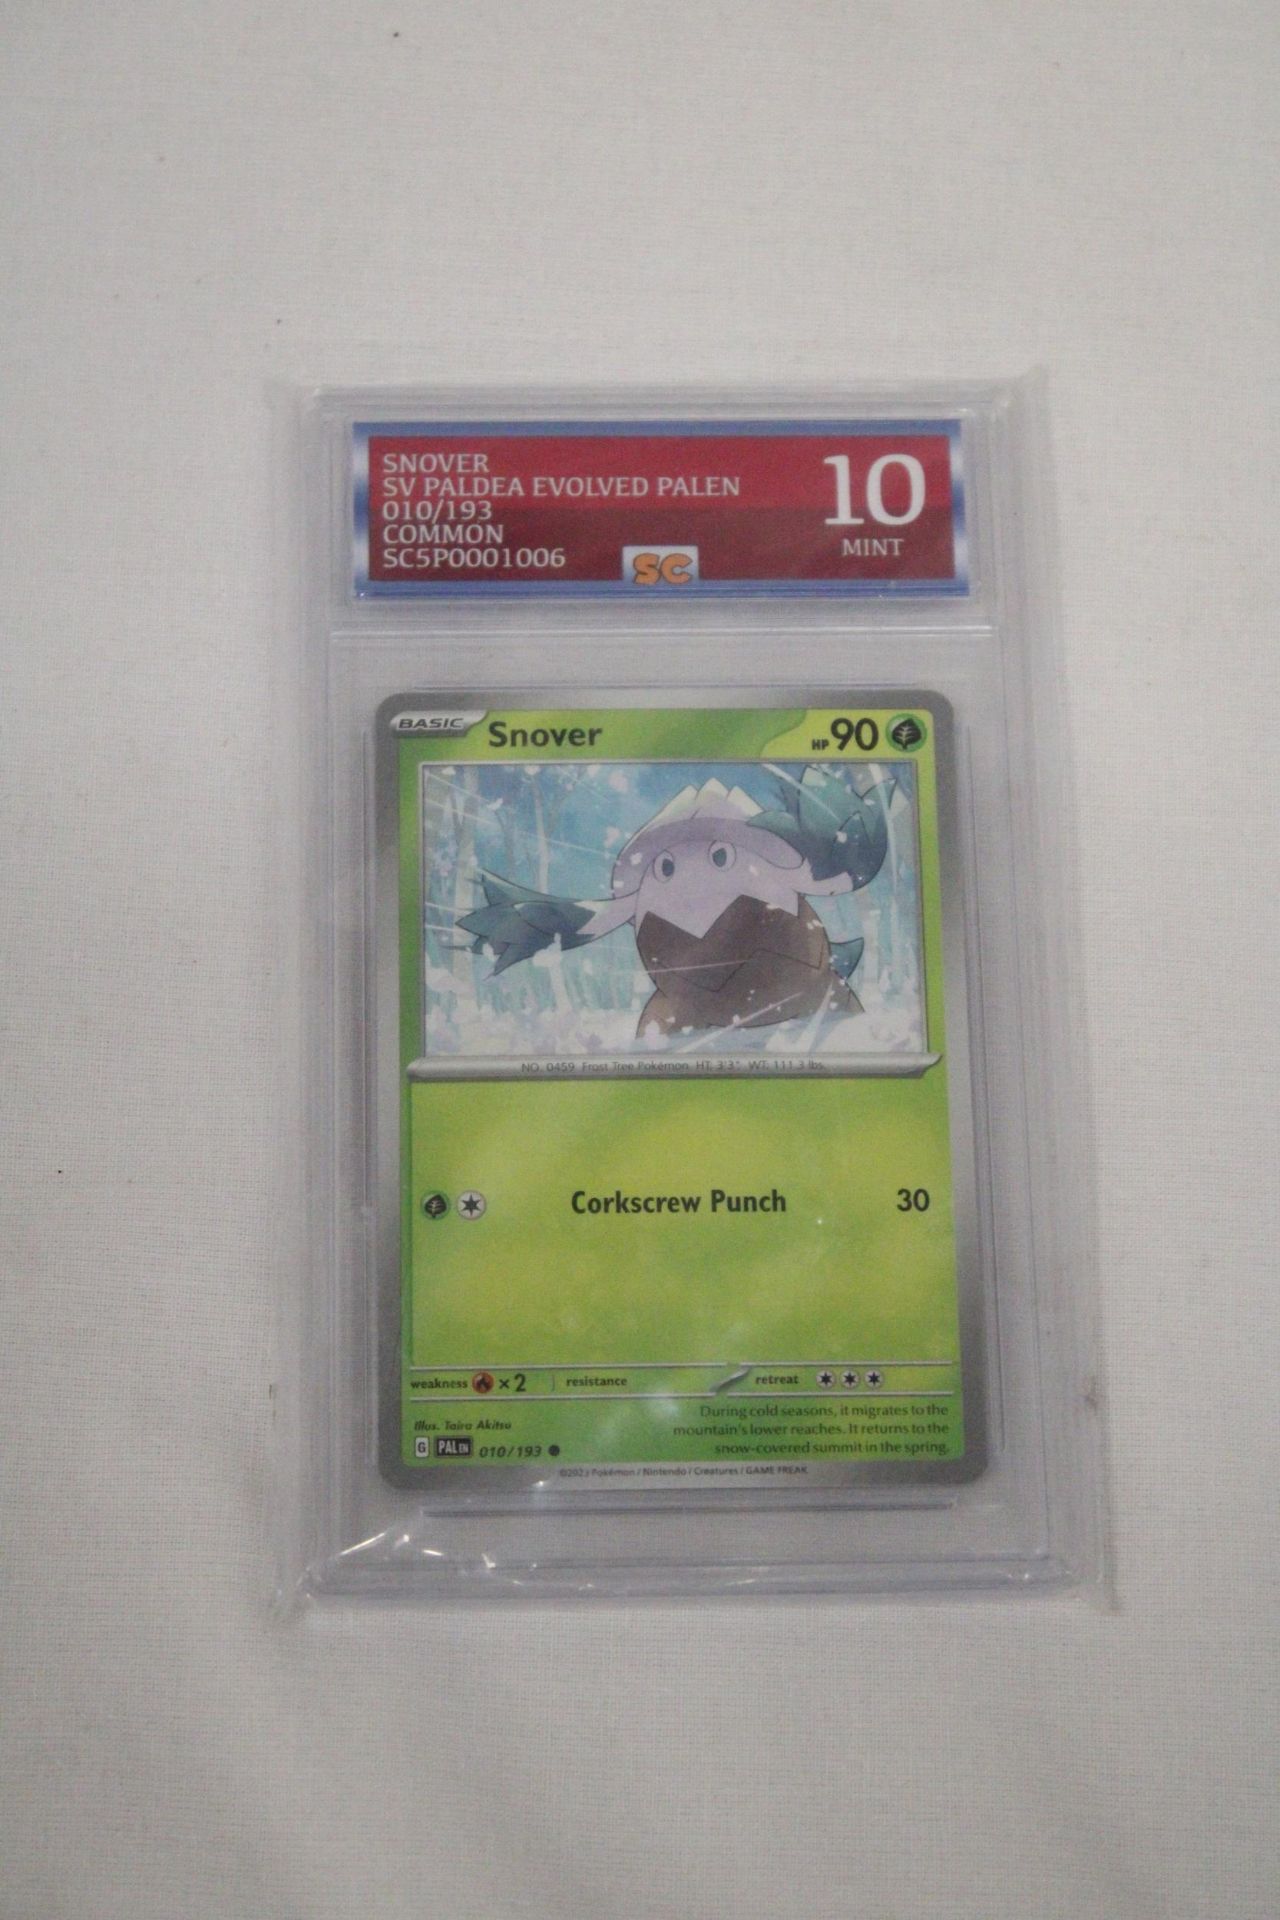 A GRADED POKEMON CARD 10/10 SNOVER - Image 4 of 4